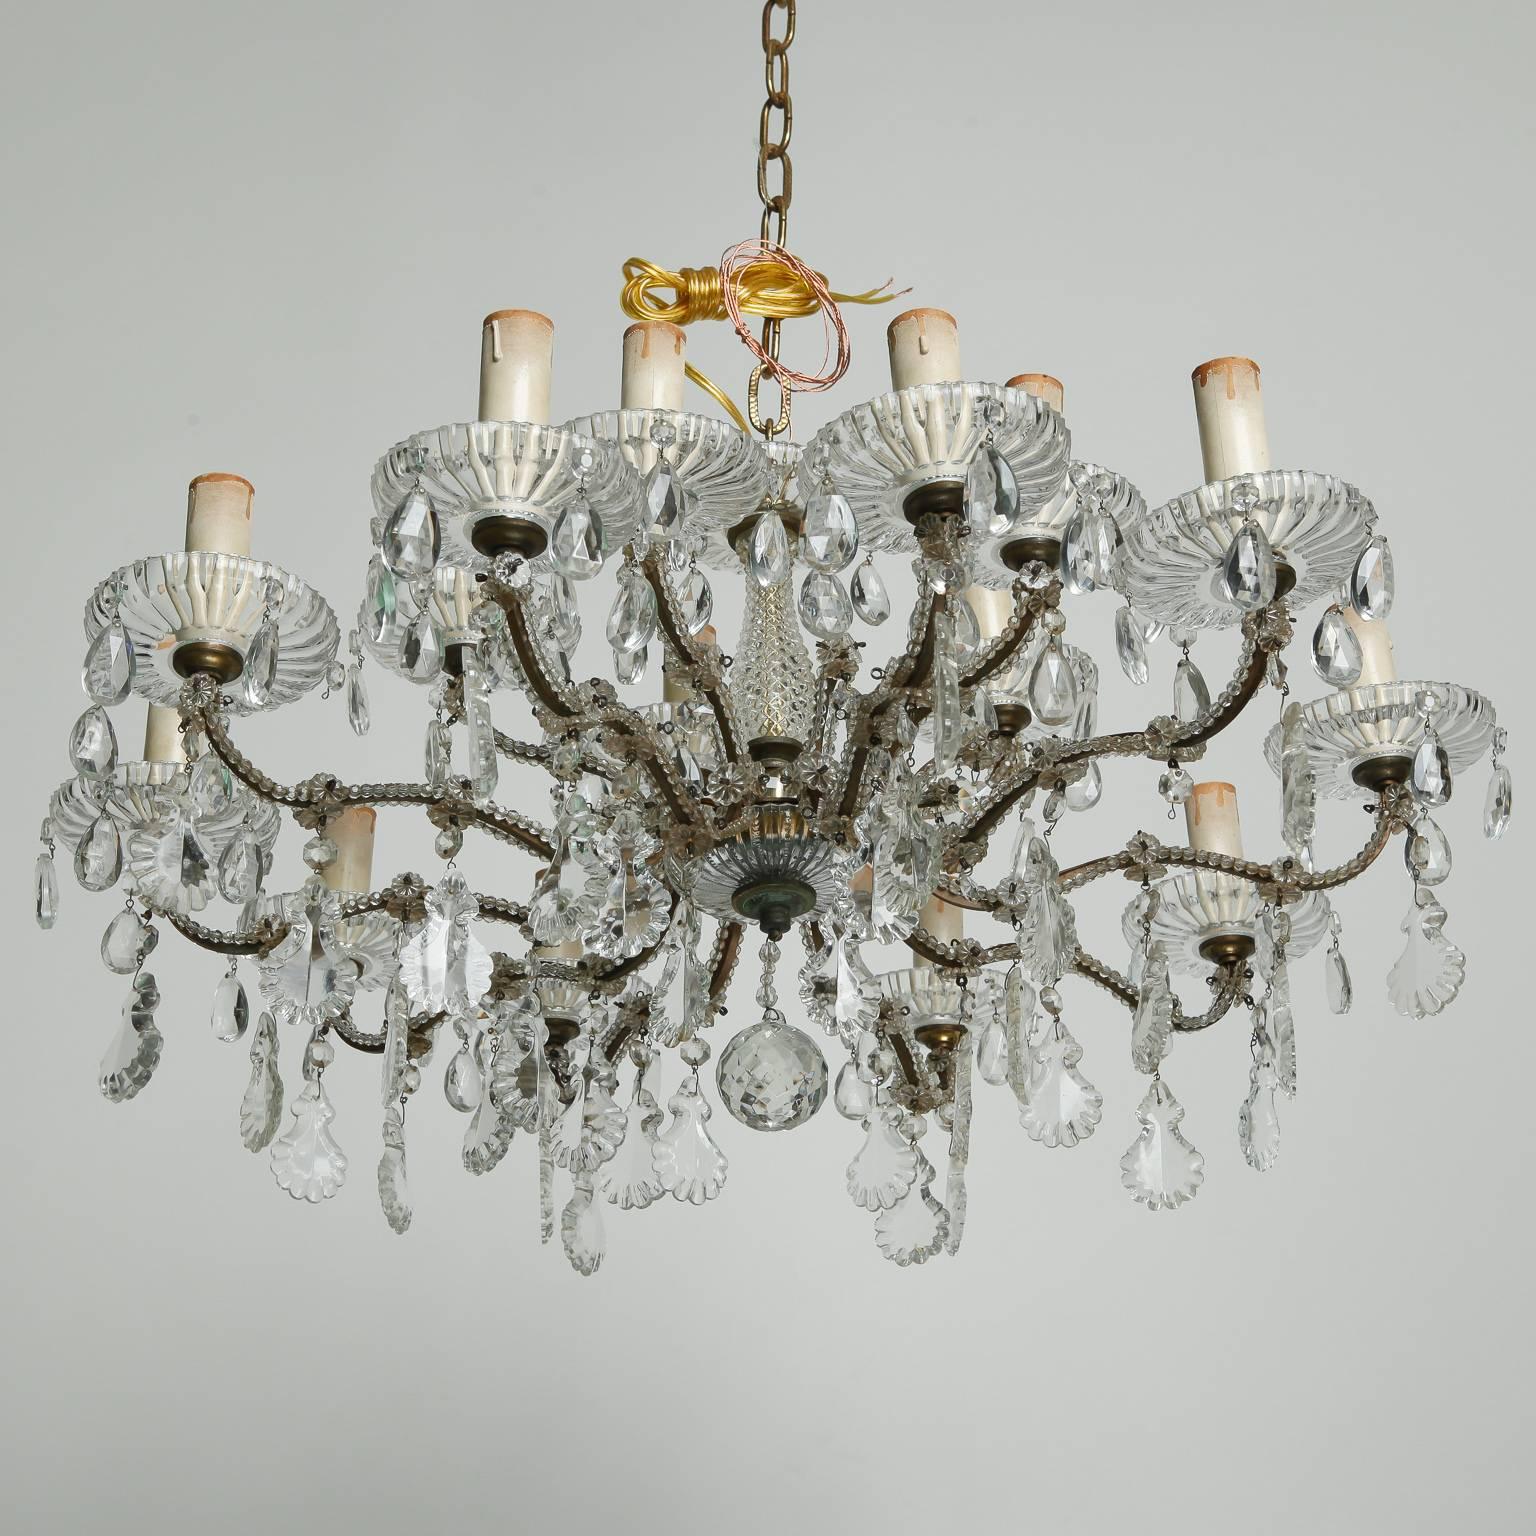 French chandelier has 15 candle style lights and a fixture height of just 12”, circa 1930s. Etched glass bobeches have dangling tear drop faceted crystals, there is a cut-glass center shaft, the candle arms are wrapped with crystal beads, dozens of